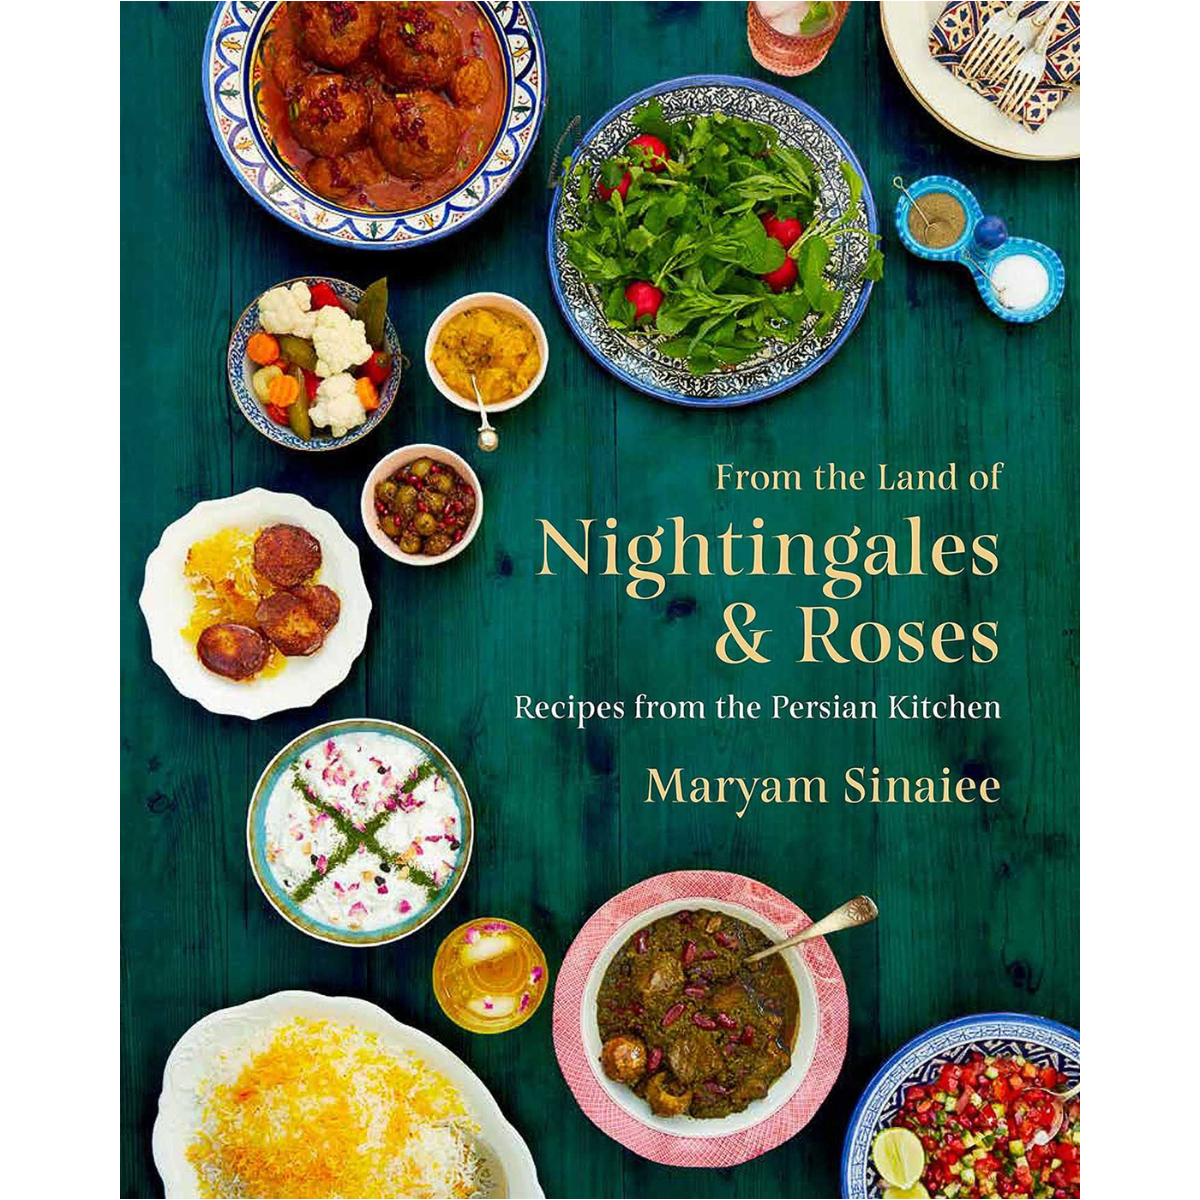 From the Land of Nightingales and Roses: Recipes from the Persian Kitchen